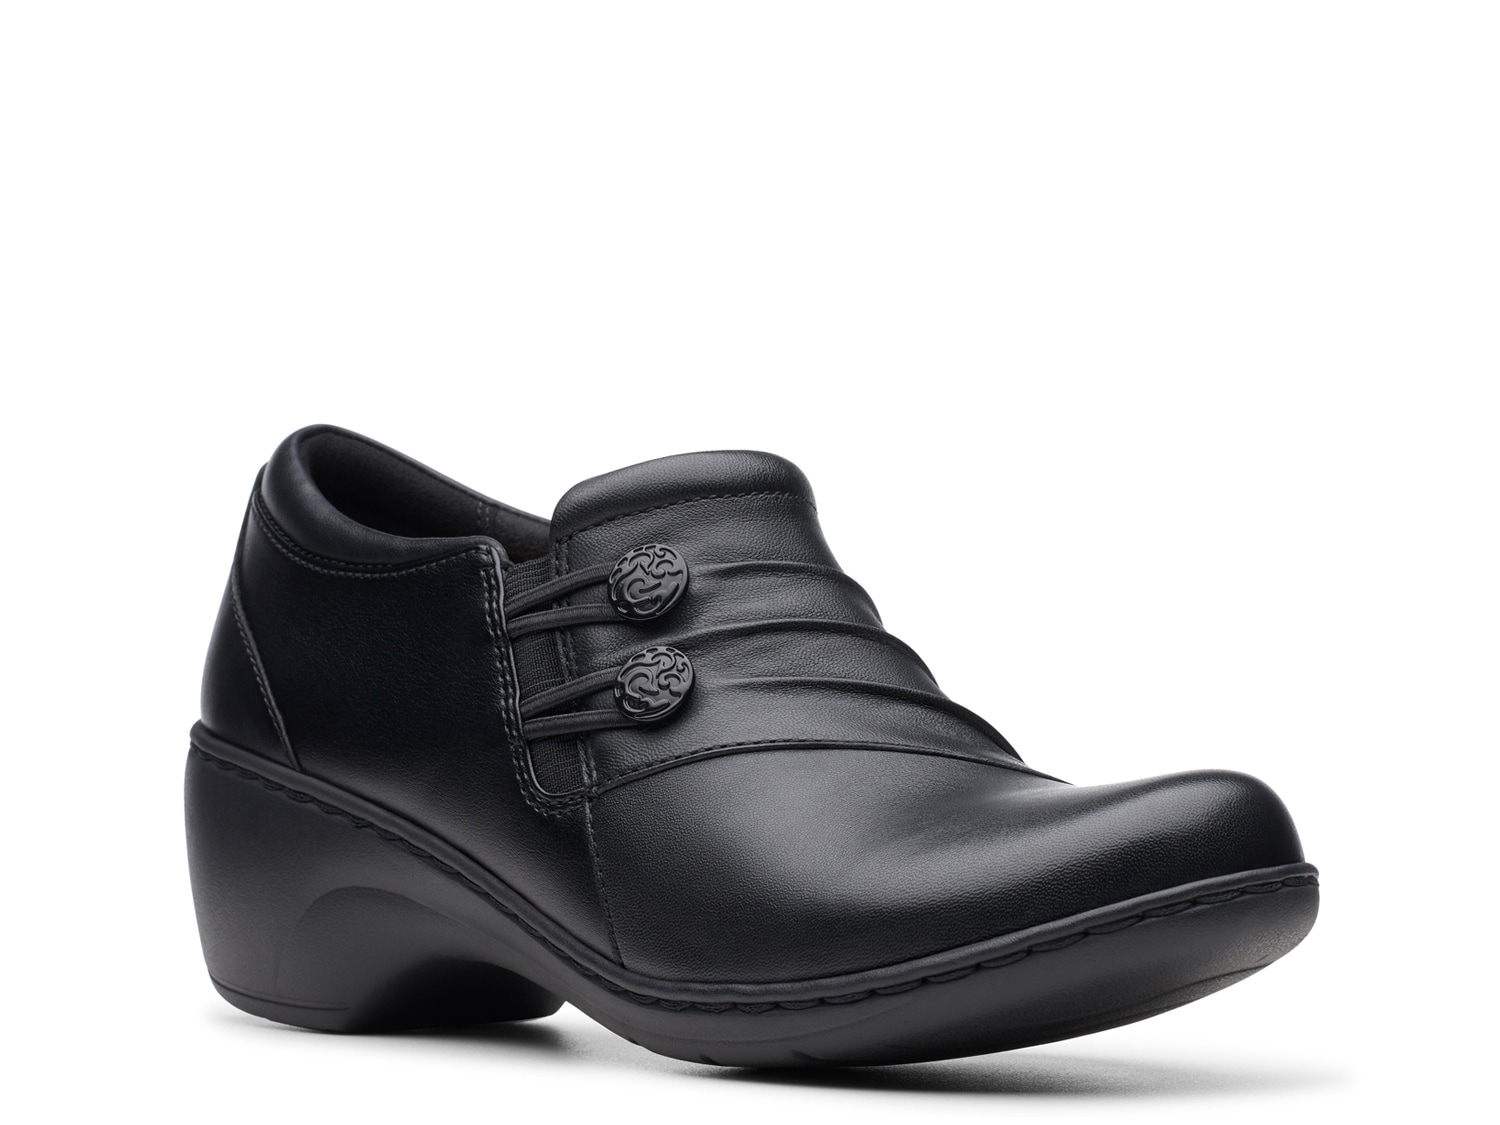 clarks womens shoes dsw